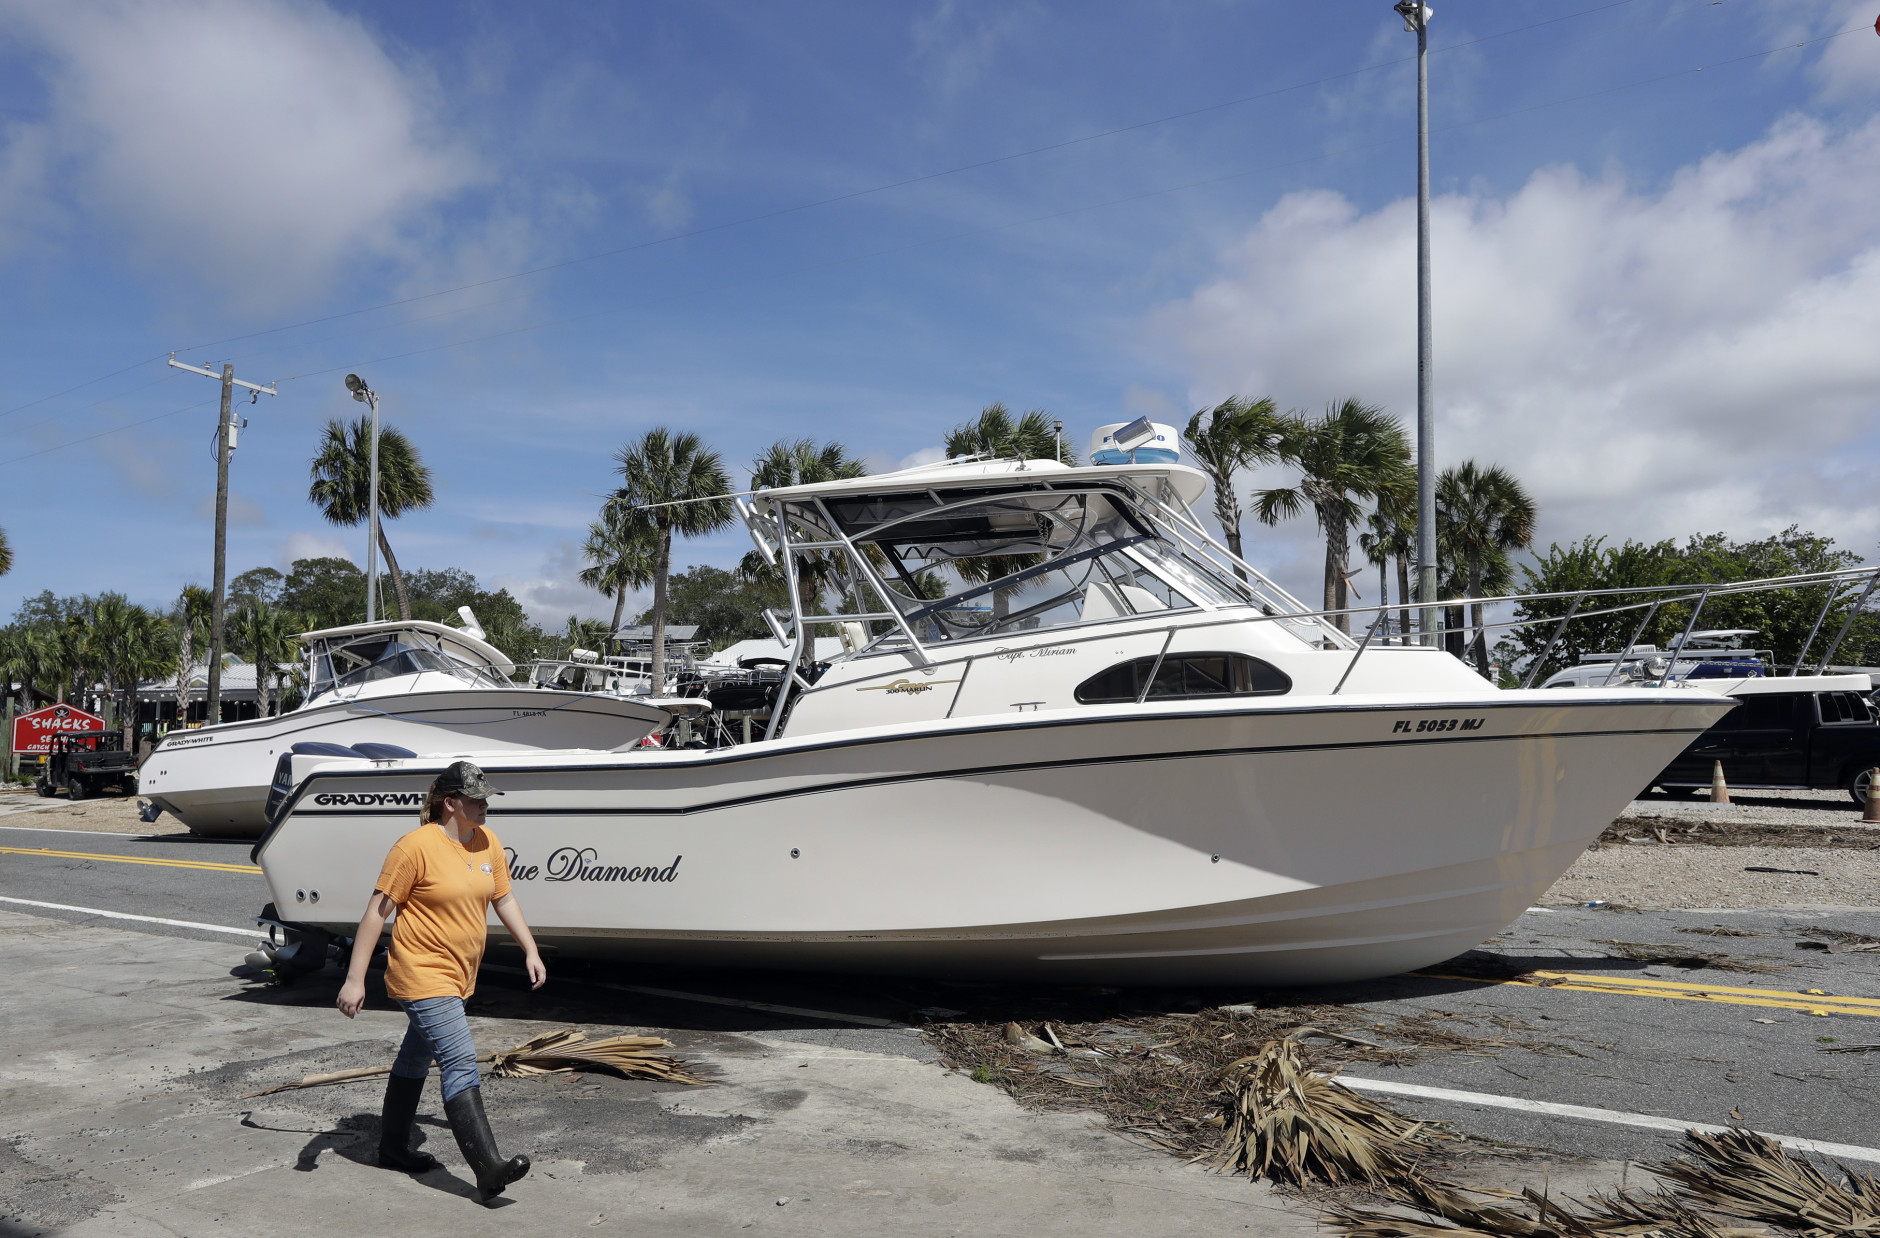 A woman walks past pleasure boats that were washed into Riverside Dr., when Hurricane Hermine came ashore early Friday, Sept. 2, 2016, in Steinhatchee, Fla. Hermine was downgraded to a tropical storm after it made landfall, as it moves over Georgia, but the U.S. National Hurricane Center says winds are increasing along the Southeast coast and flooding rains continue.(AP Photo/Chris O'Meara)